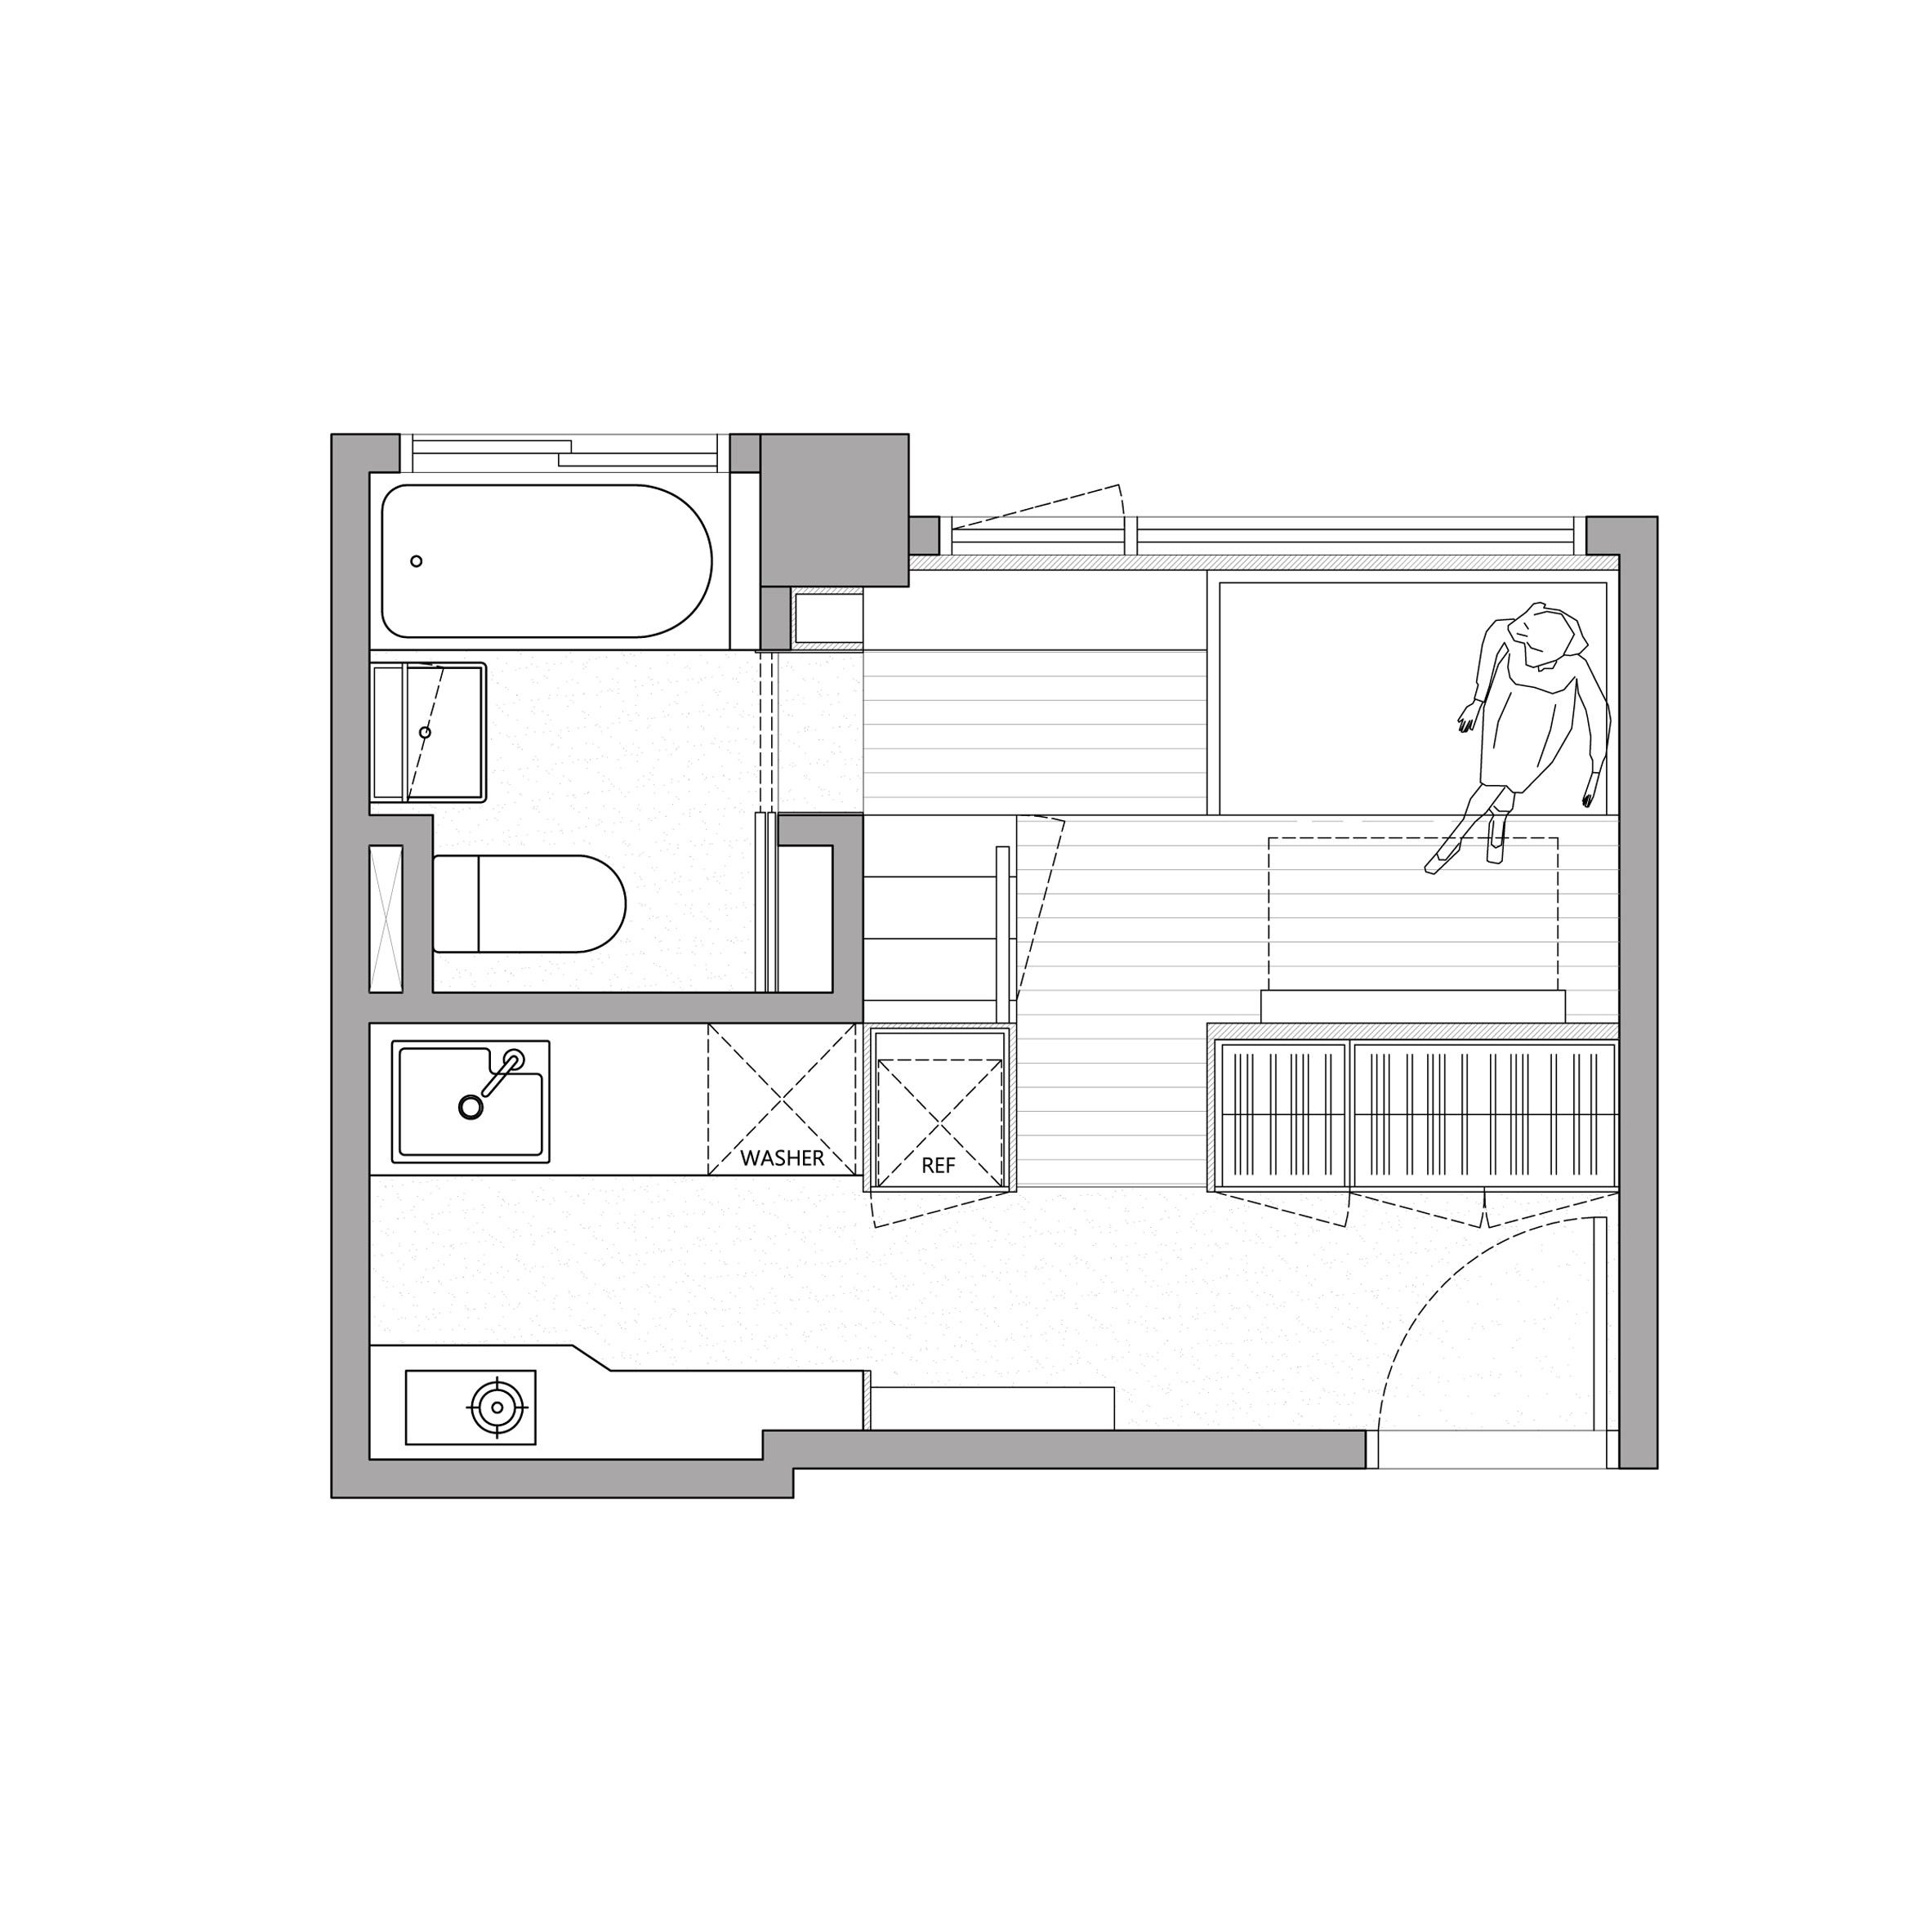 The plan reveals the space has been maximized as best as possible, especially on the main floor